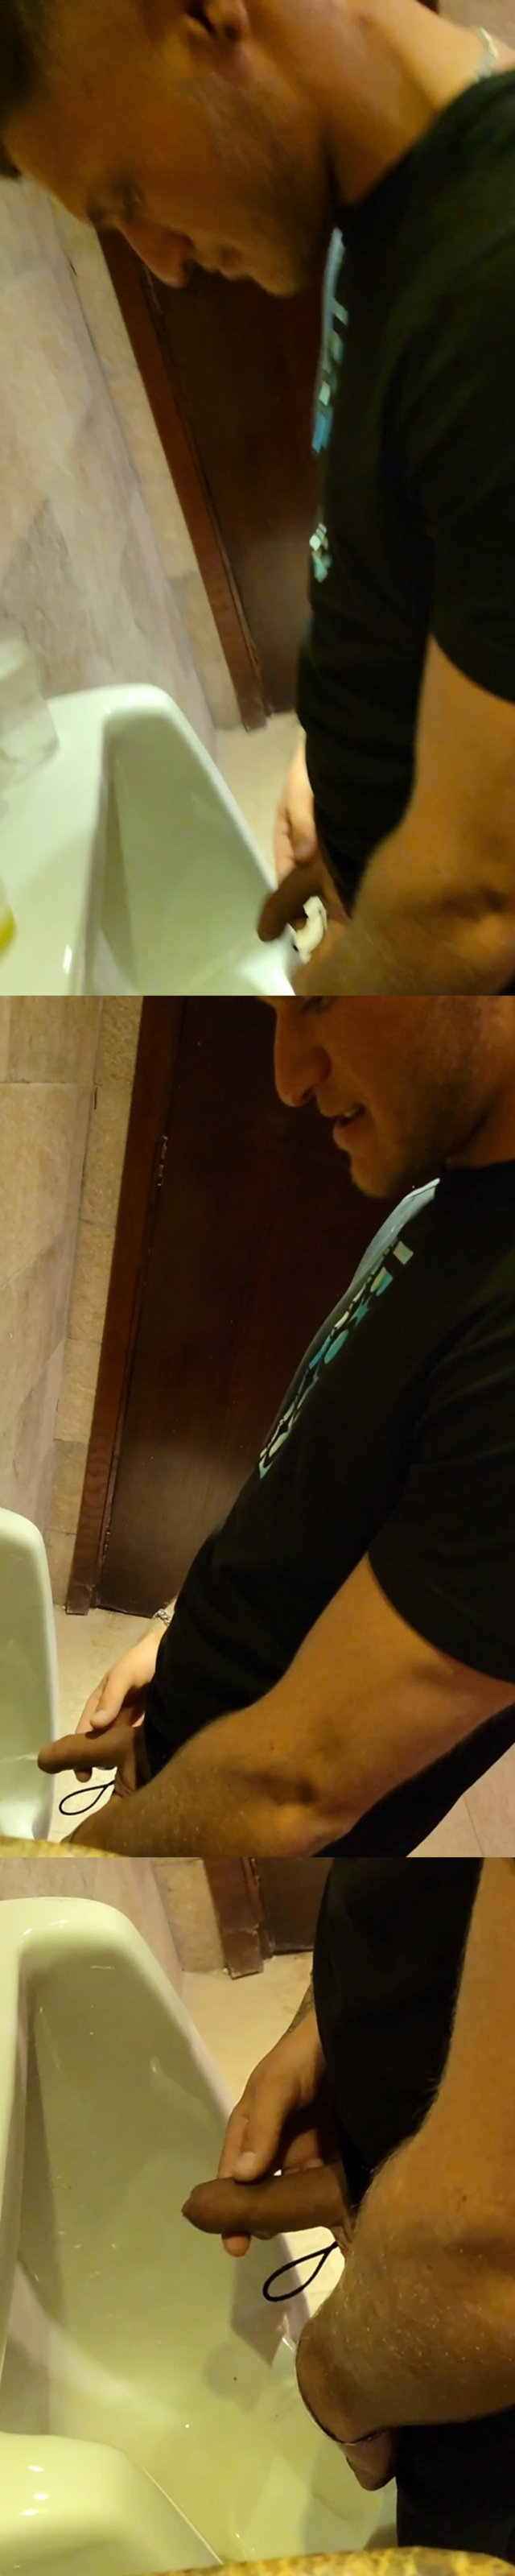 handsome sexy uncut guy caught peeing at urinals by spycam